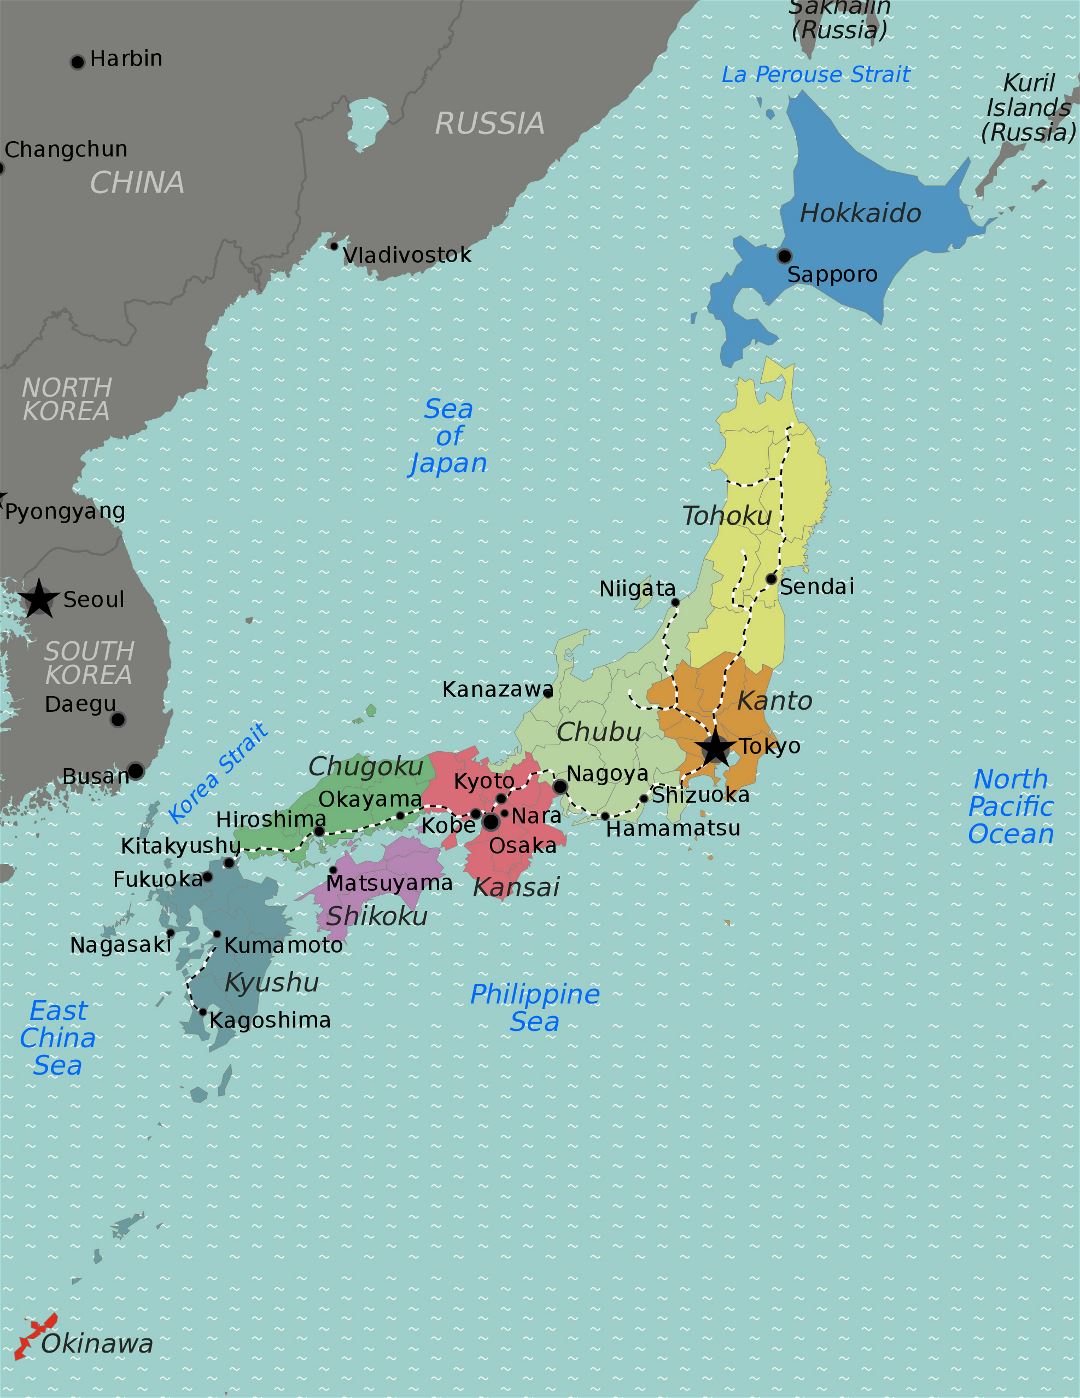 Large regions map of Japan